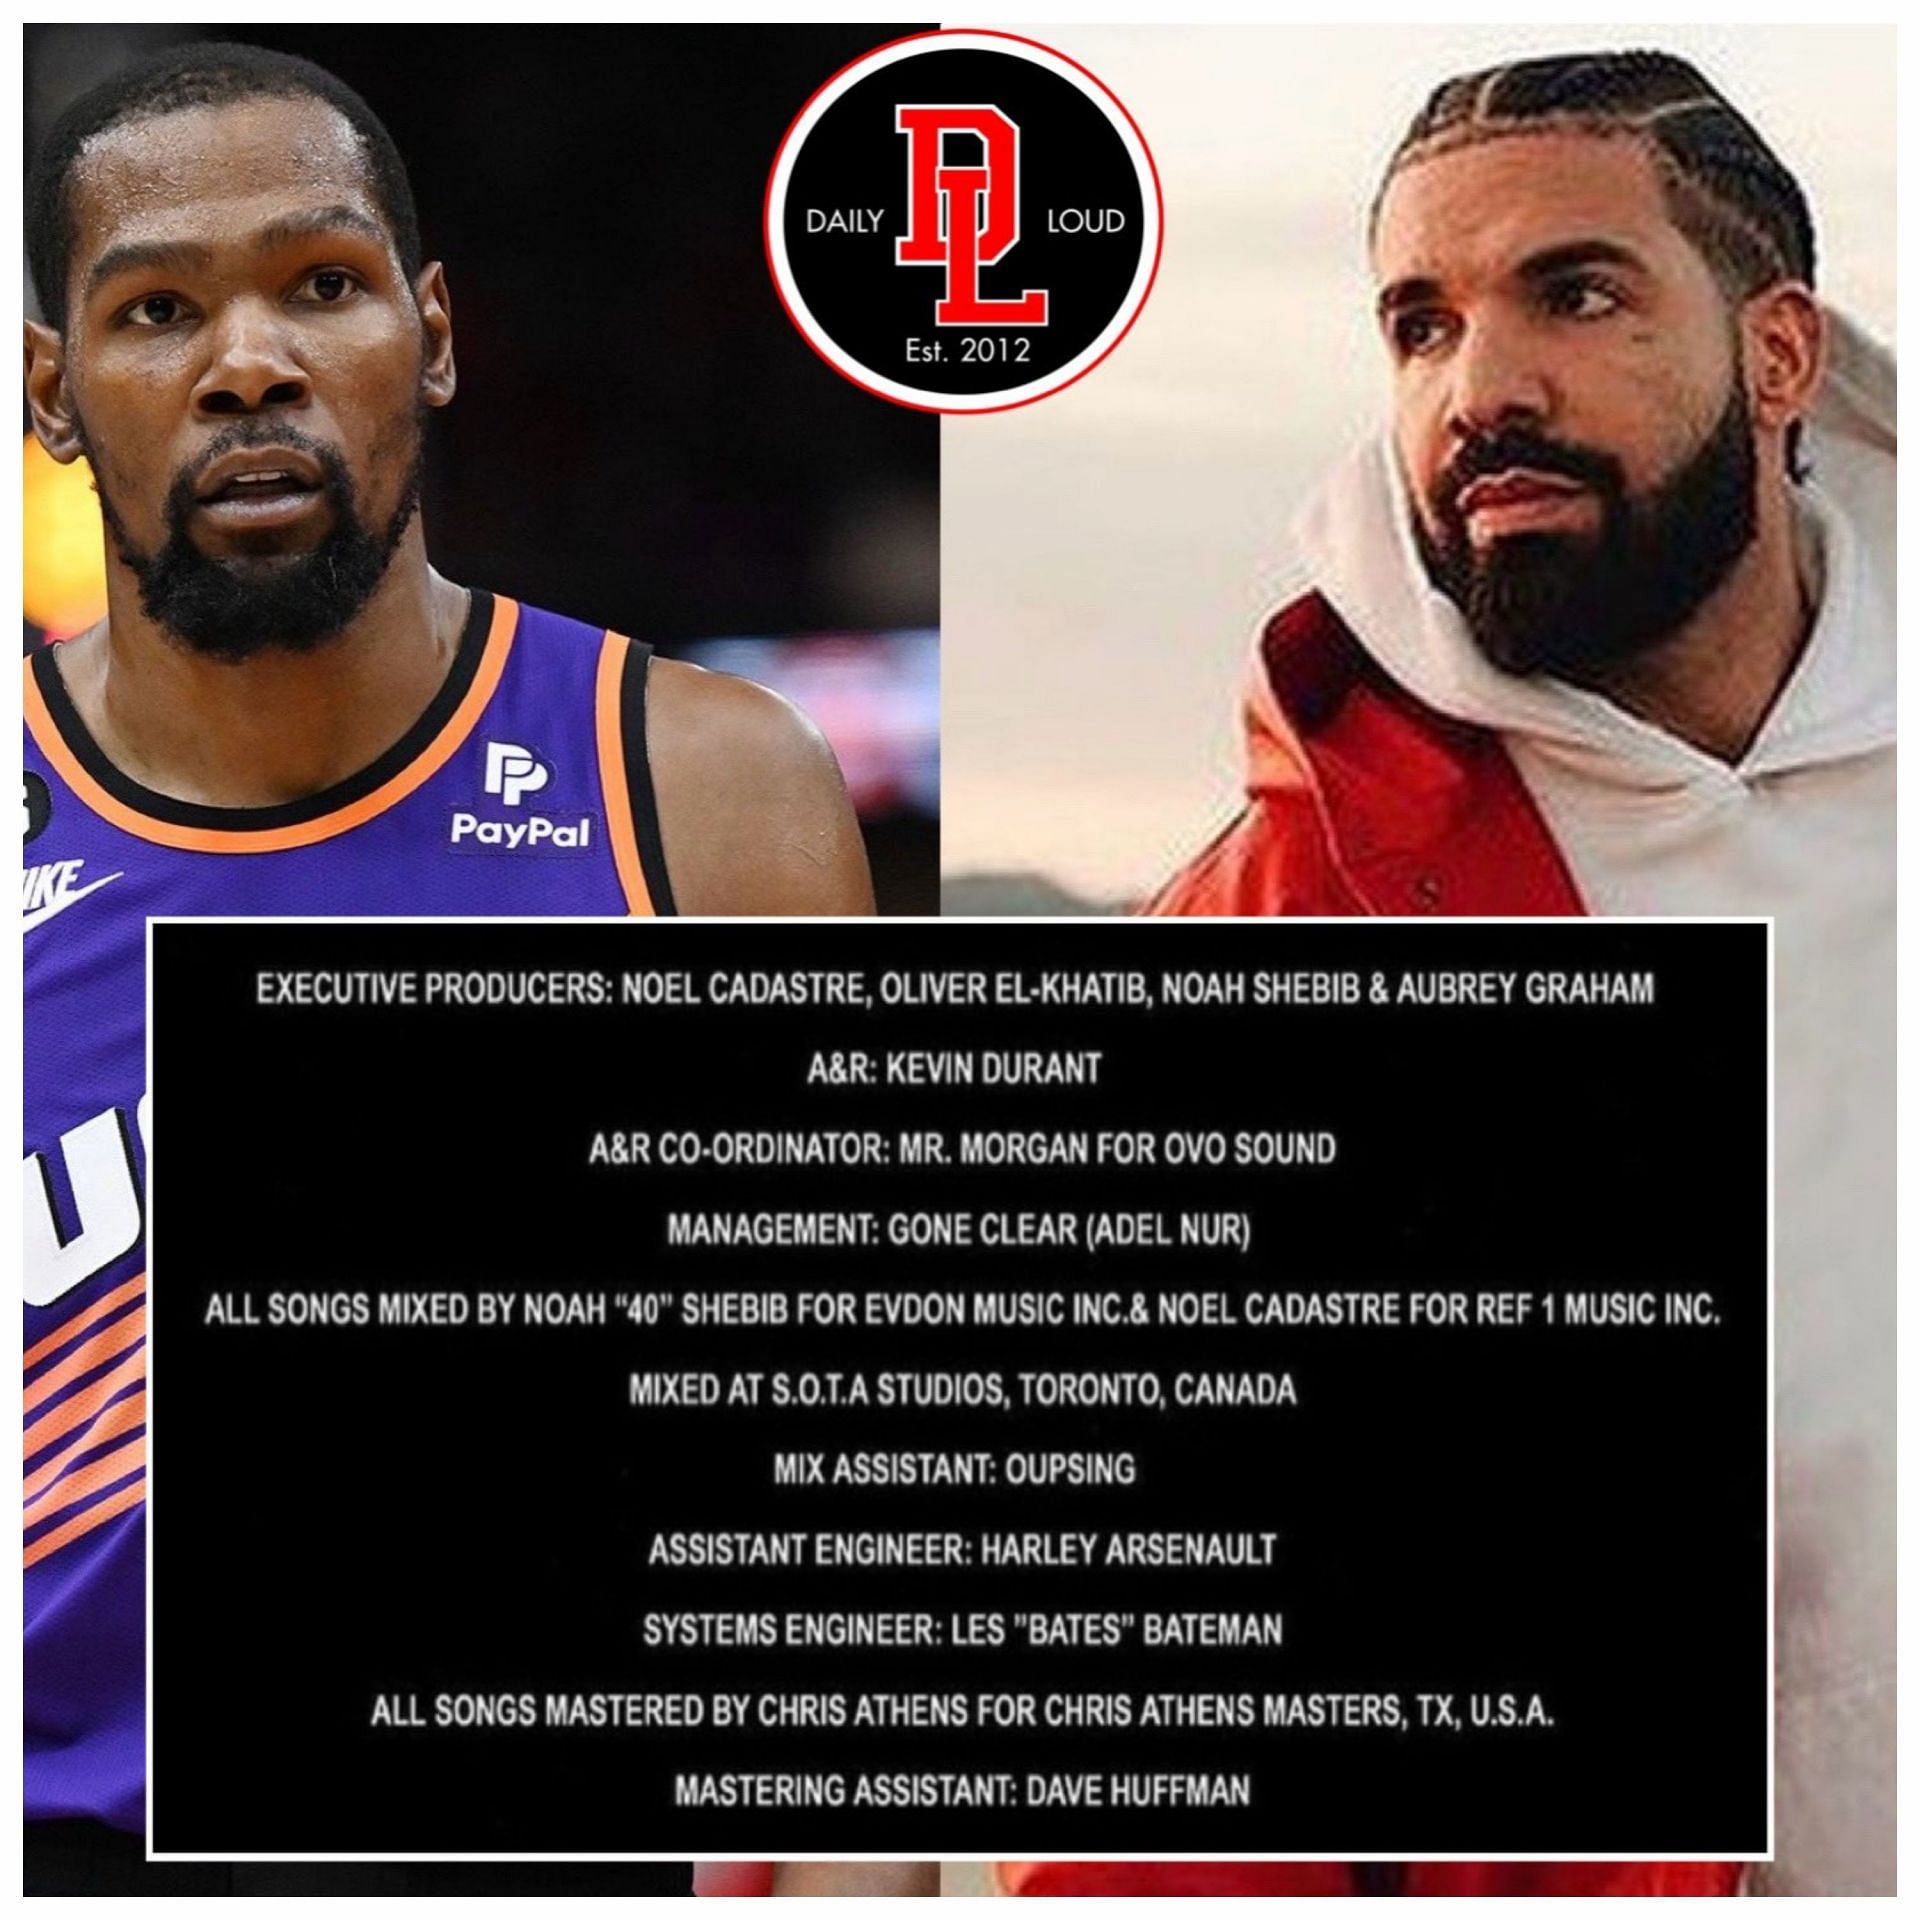 Drake-Durant&#039;s collaboration in 